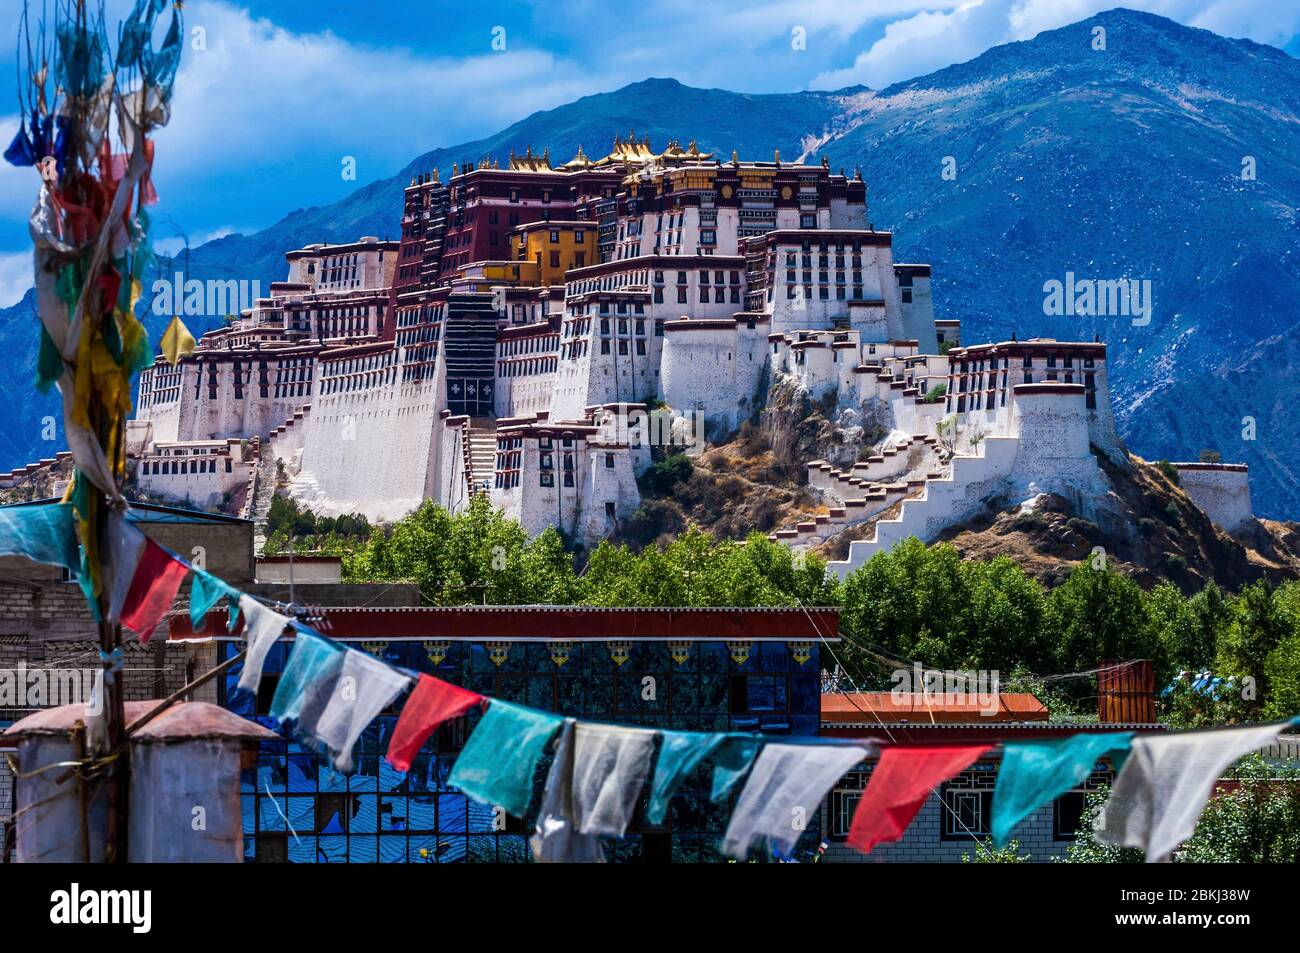 why is the potala in tibet called the palace of the gods